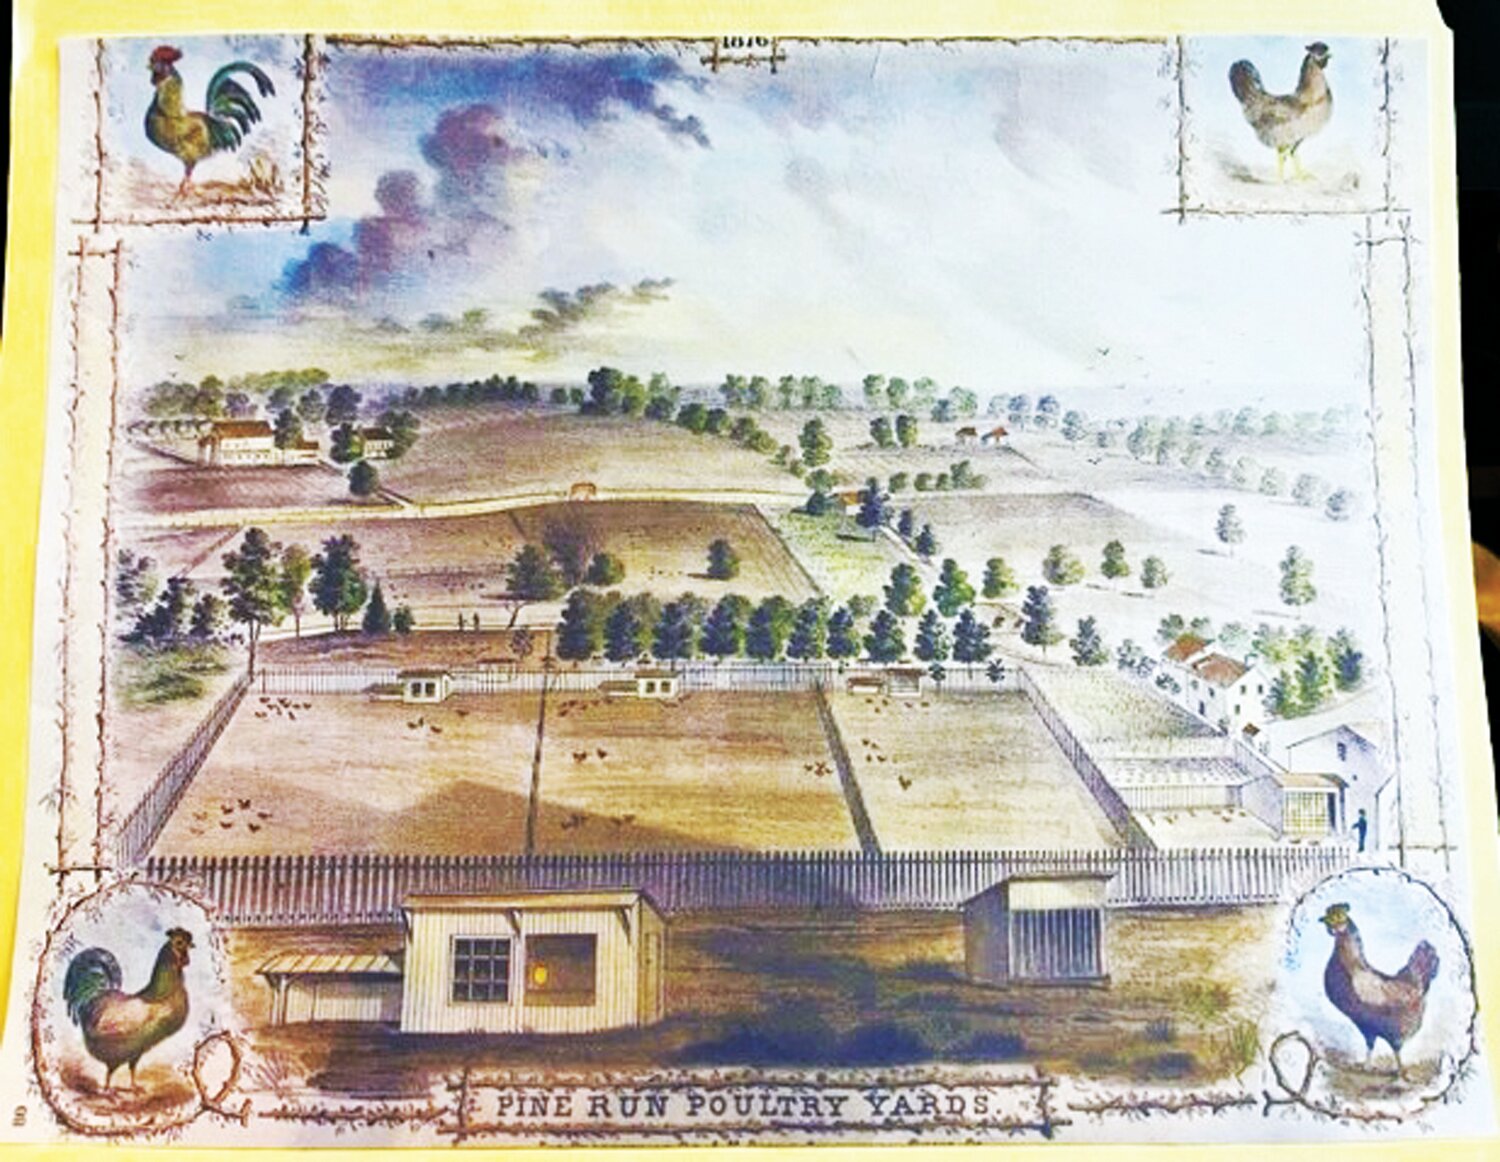 An 1876 image of the Pine Run Poultry Yards in Plumstead Township.